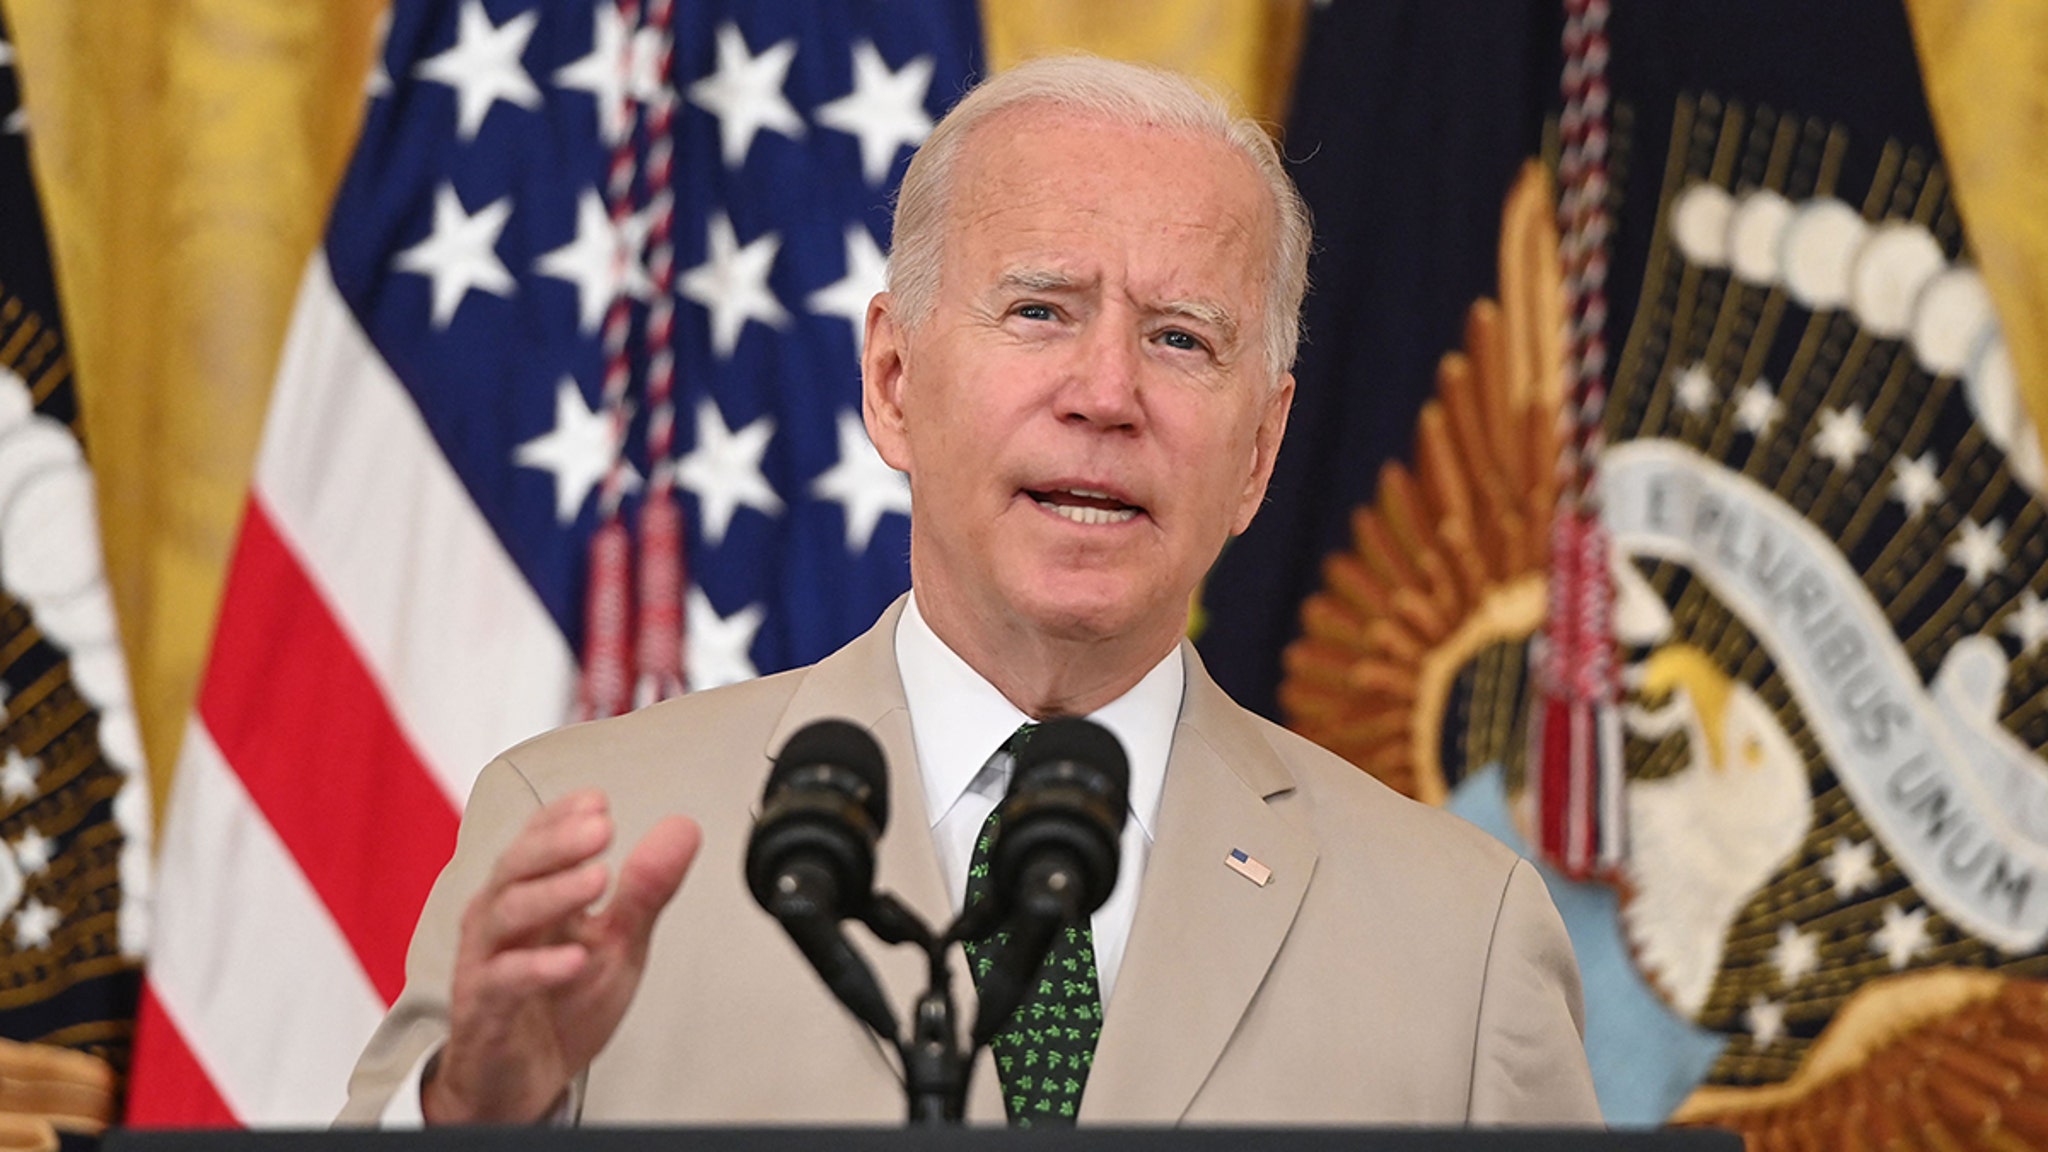 President Biden Wears Tan Suit Nearly 7 Years After Obama's Controversy